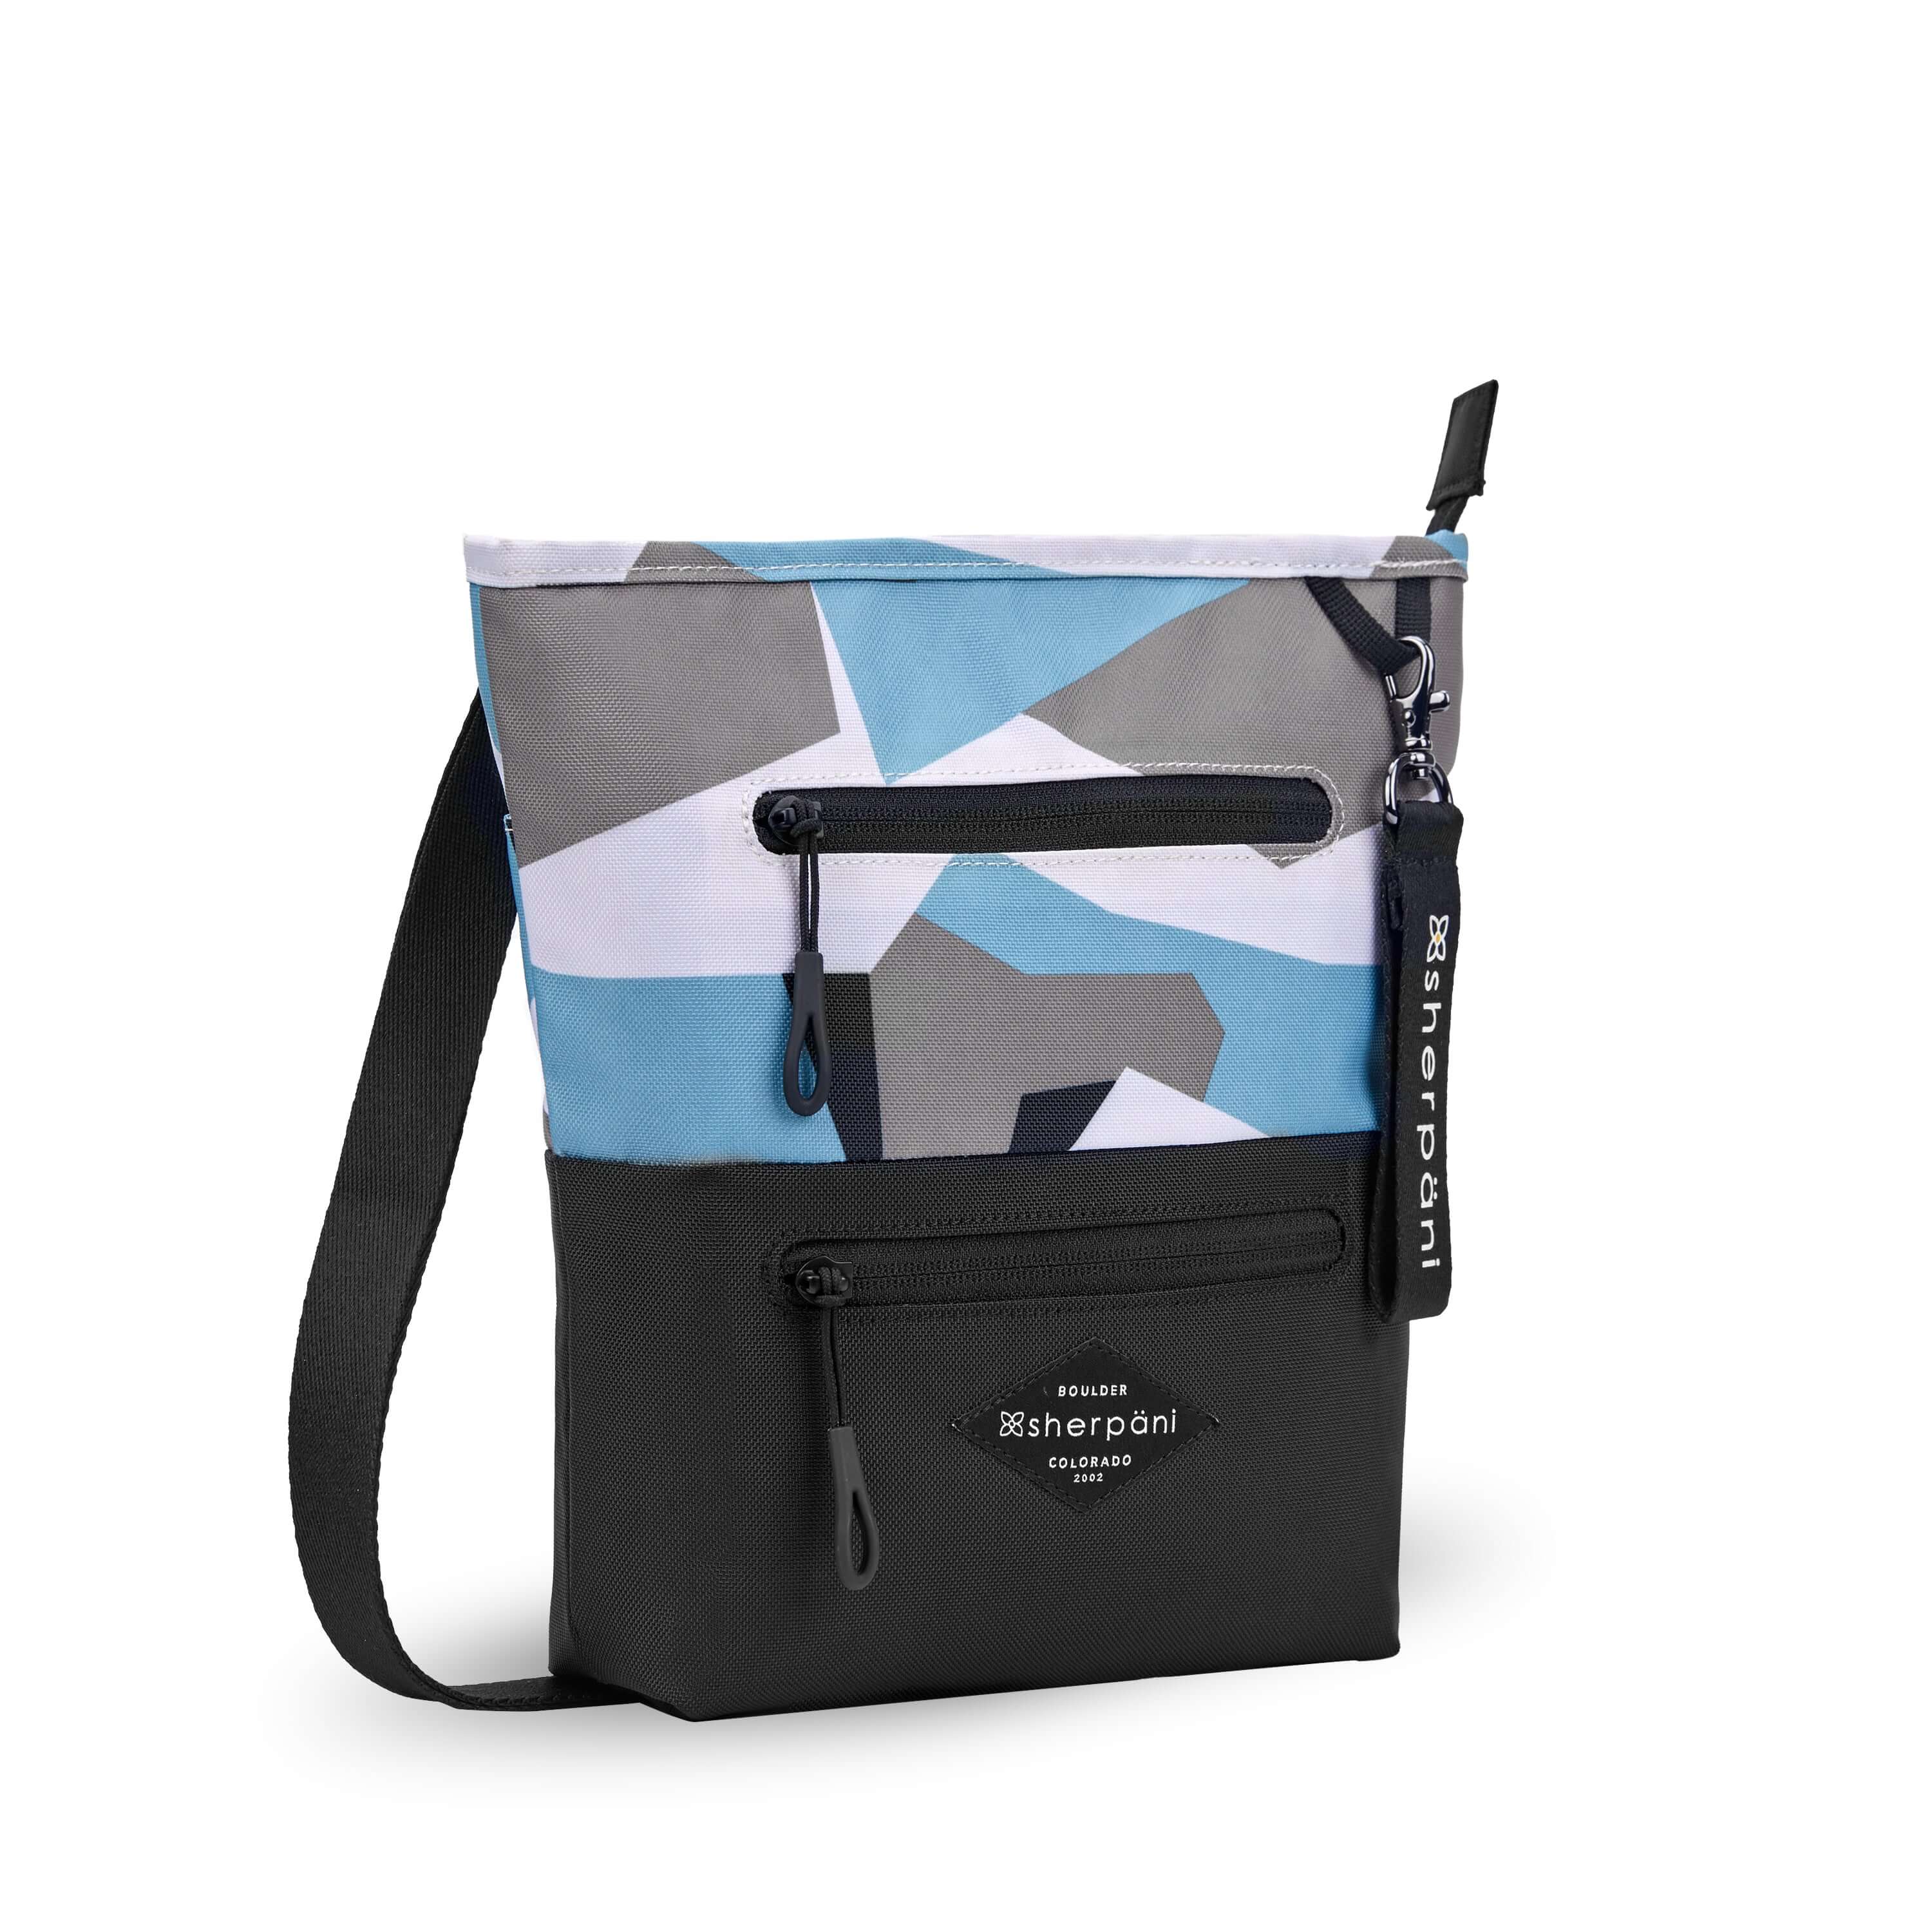 Angled front view of Sherpani’s crossbody, the Sadie, in Summer Camo. The top half of the bag is a camouflage pattern of white, gray and light blue, the bottom half of the bag is black. It features two exterior zipper pockets on the front panel with easy pull zippers accented in black. A Sherpani branded keychain is attached to a fabric loop in the upper right corner. It has an adjustable crossbody strap. #color_summer camo